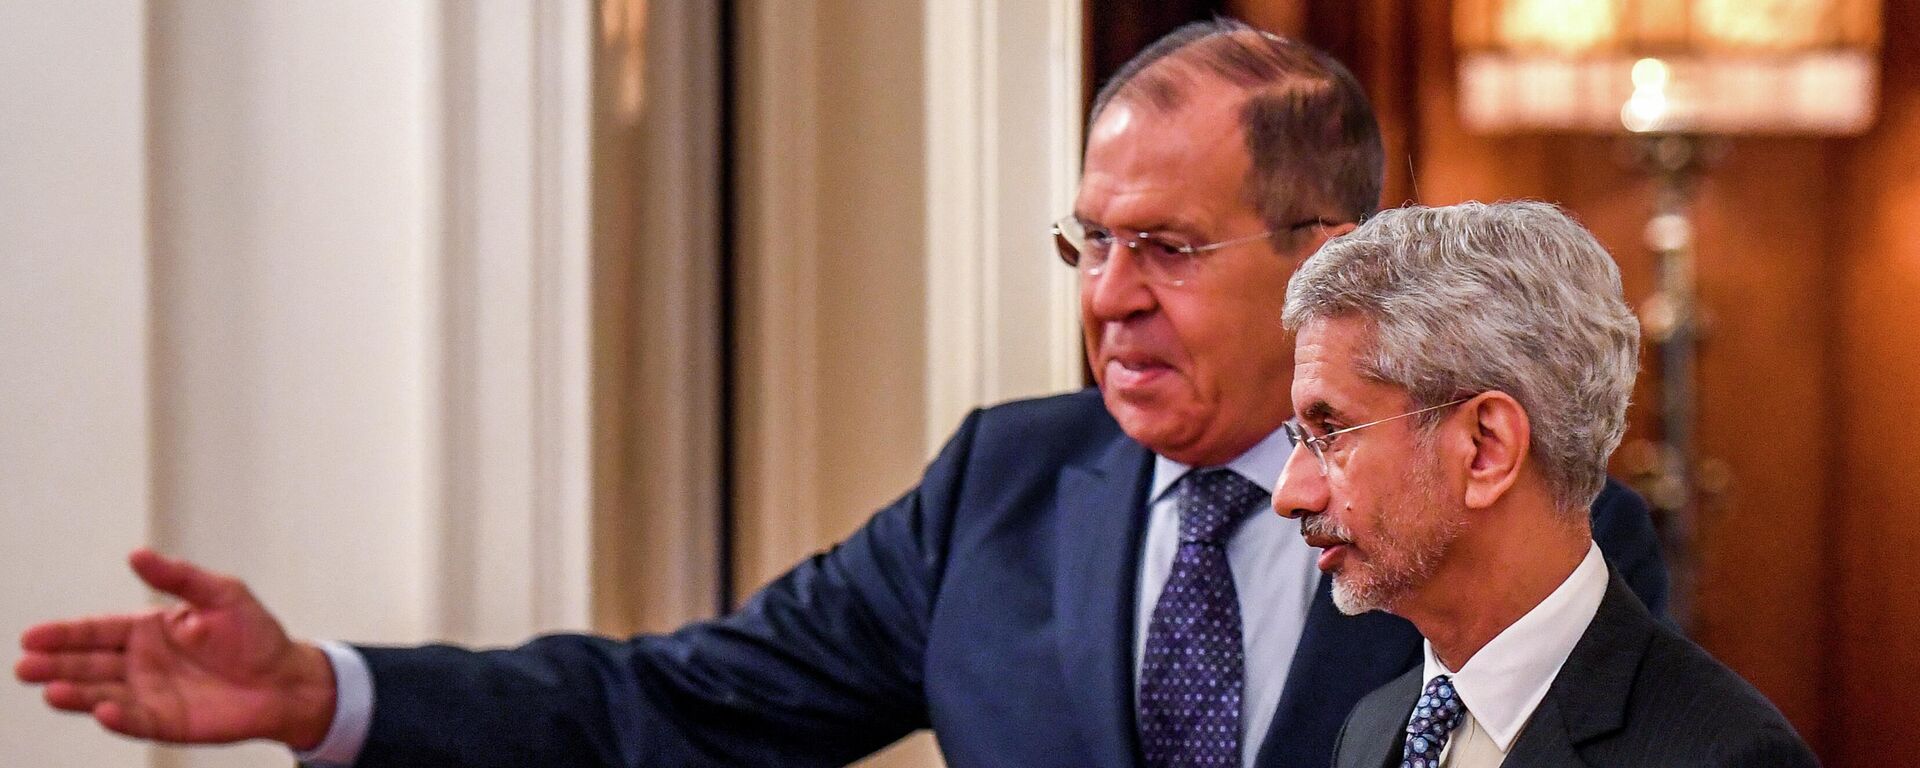 Russian Foreign Minister Sergei Lavrov (L) welcomes Indian Foreign Secretary Subrahmanyam Jaishankar ahead of their meeting in Moscow on August 28, 2019. - Sputnik International, 1920, 07.11.2022